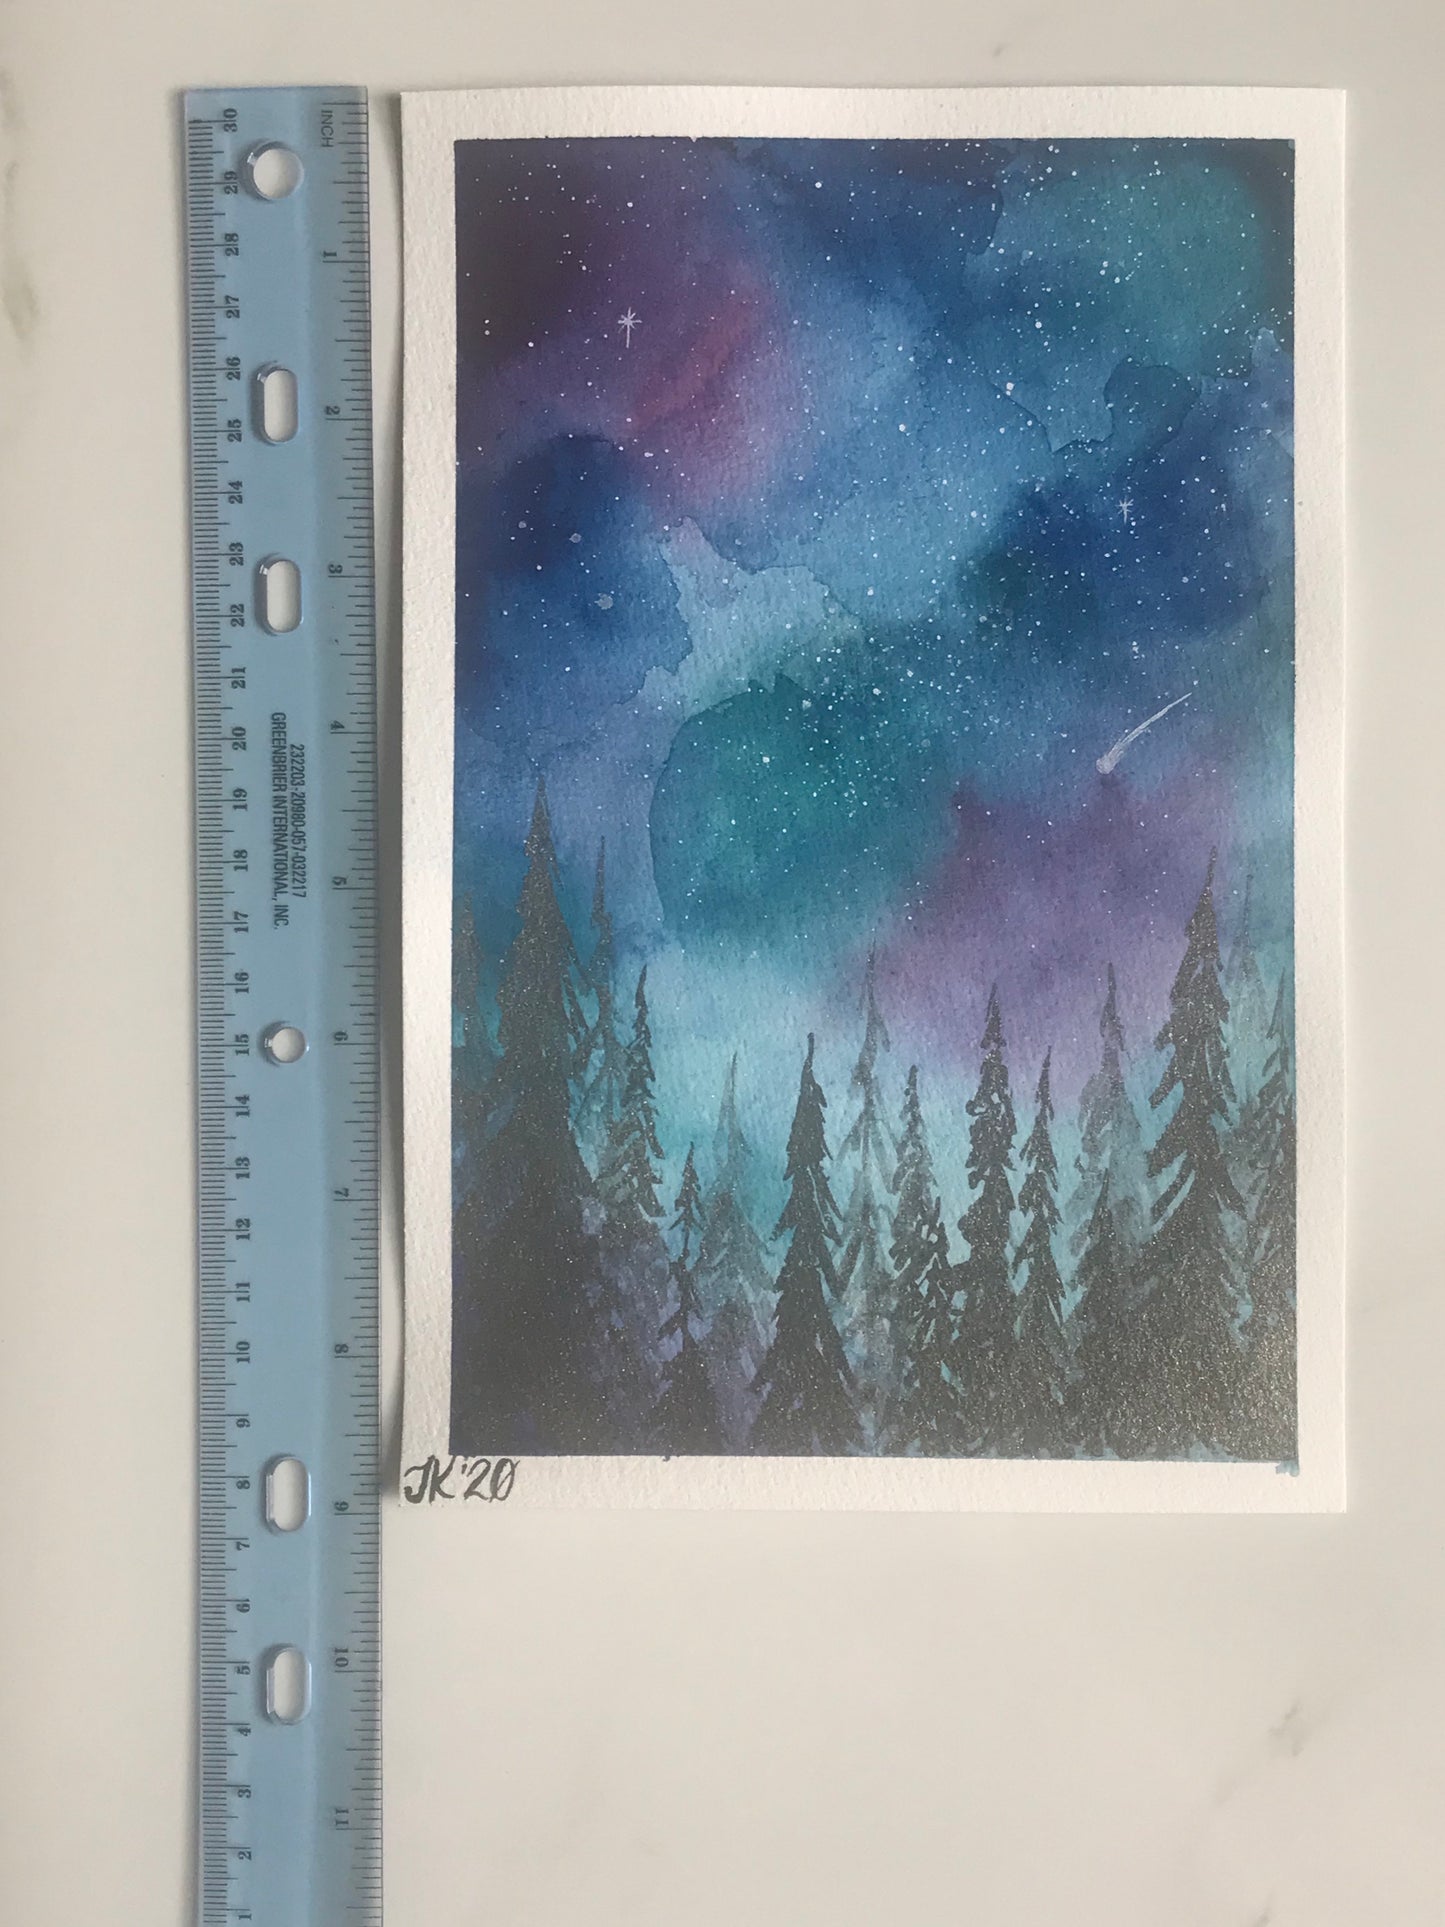 Colorful Night Sky with duochrome trees - Original Watercolor Painting